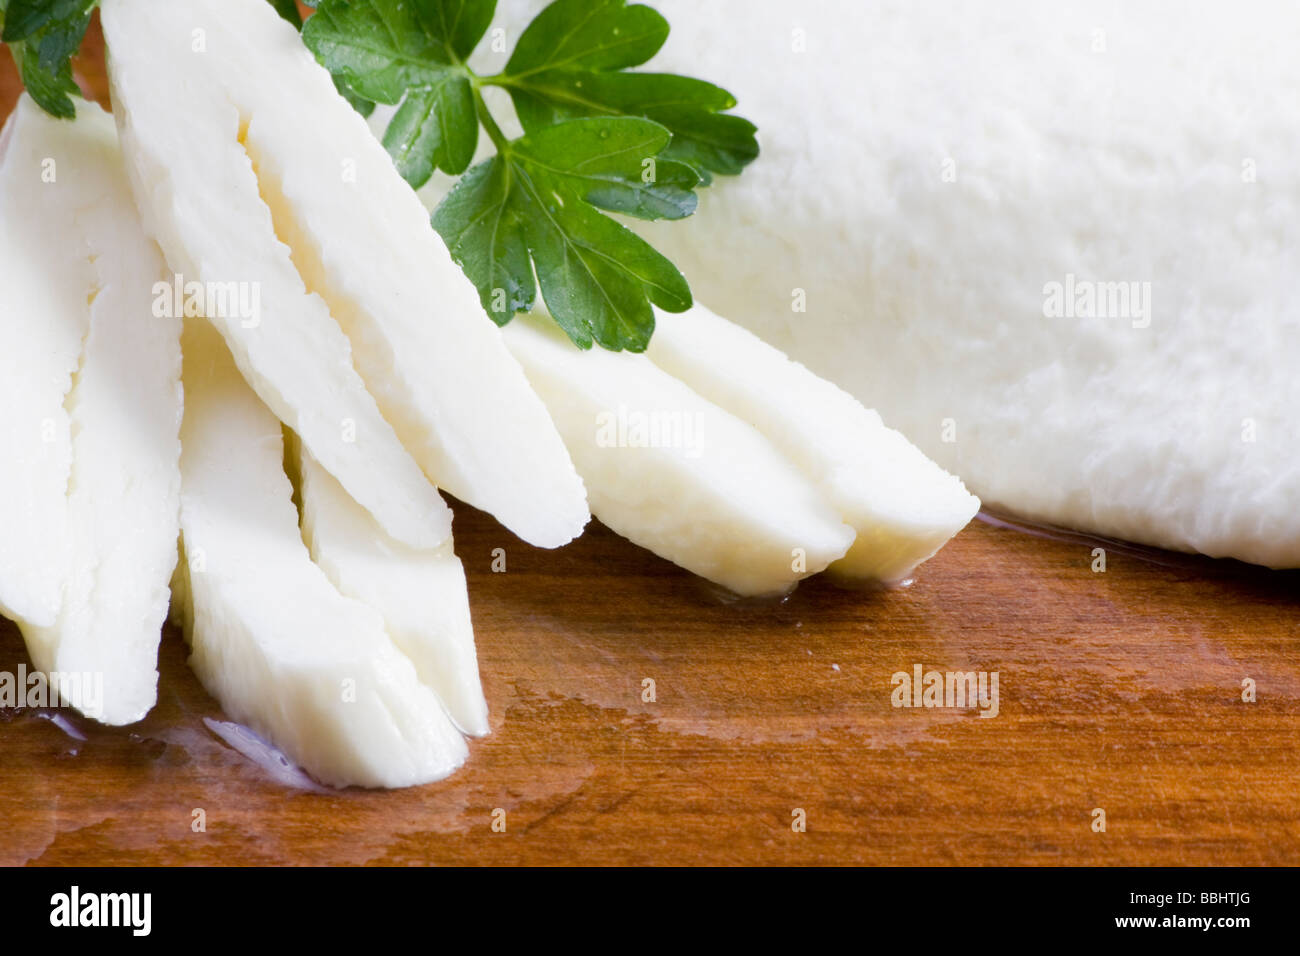 Closeup of halloumi (traditional cypriot cheese) slices. Stock Photo